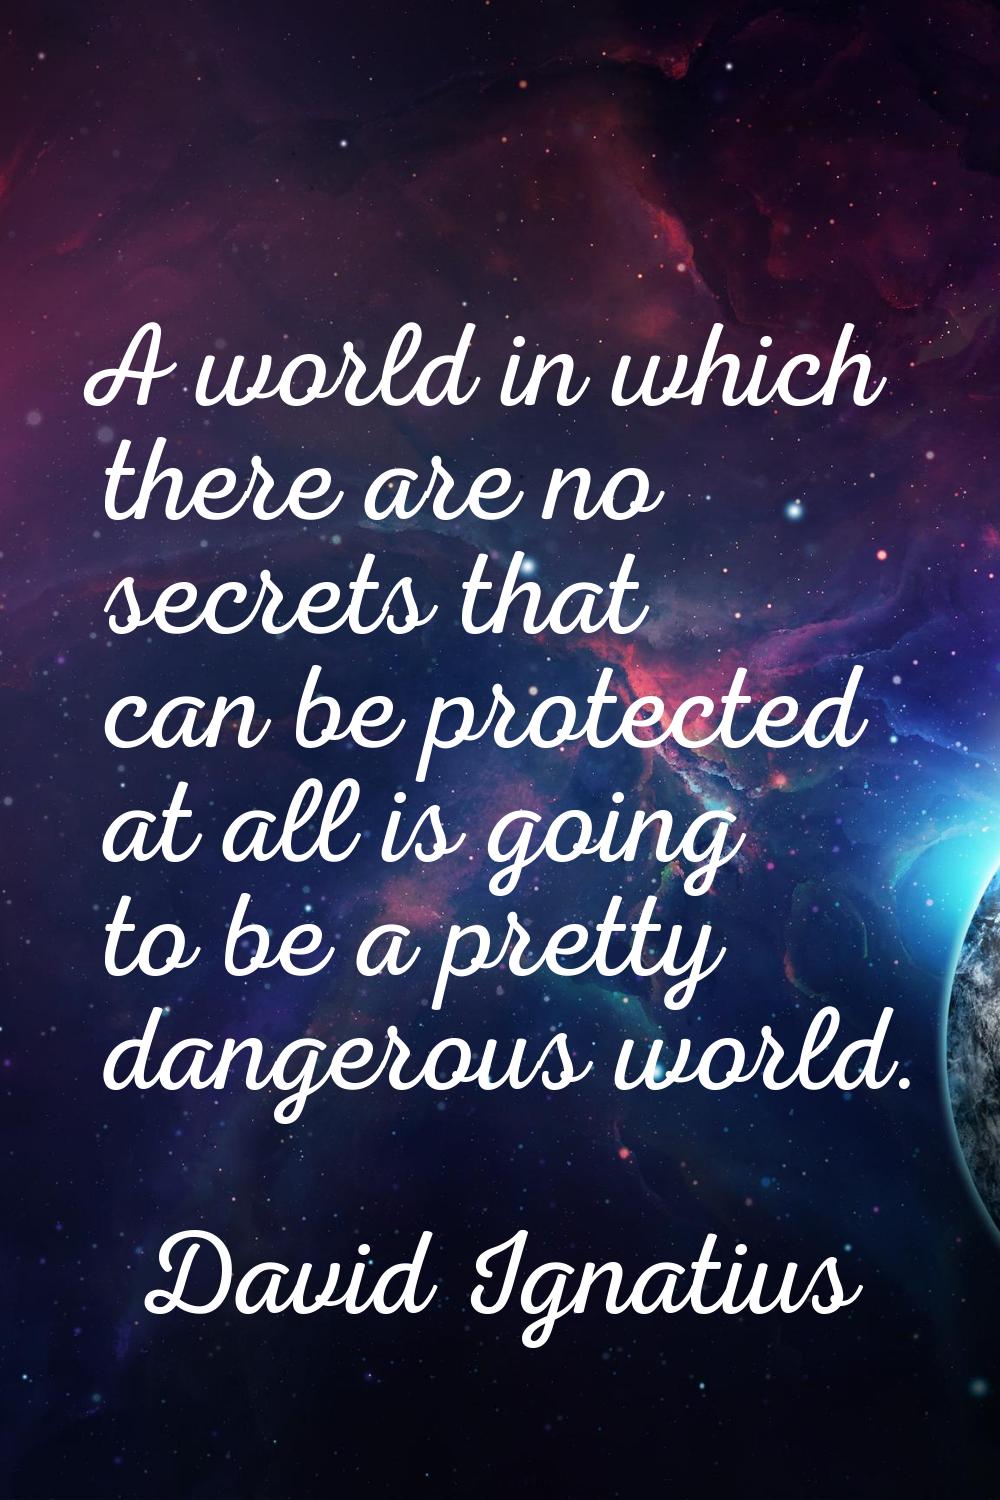 A world in which there are no secrets that can be protected at all is going to be a pretty dangerou